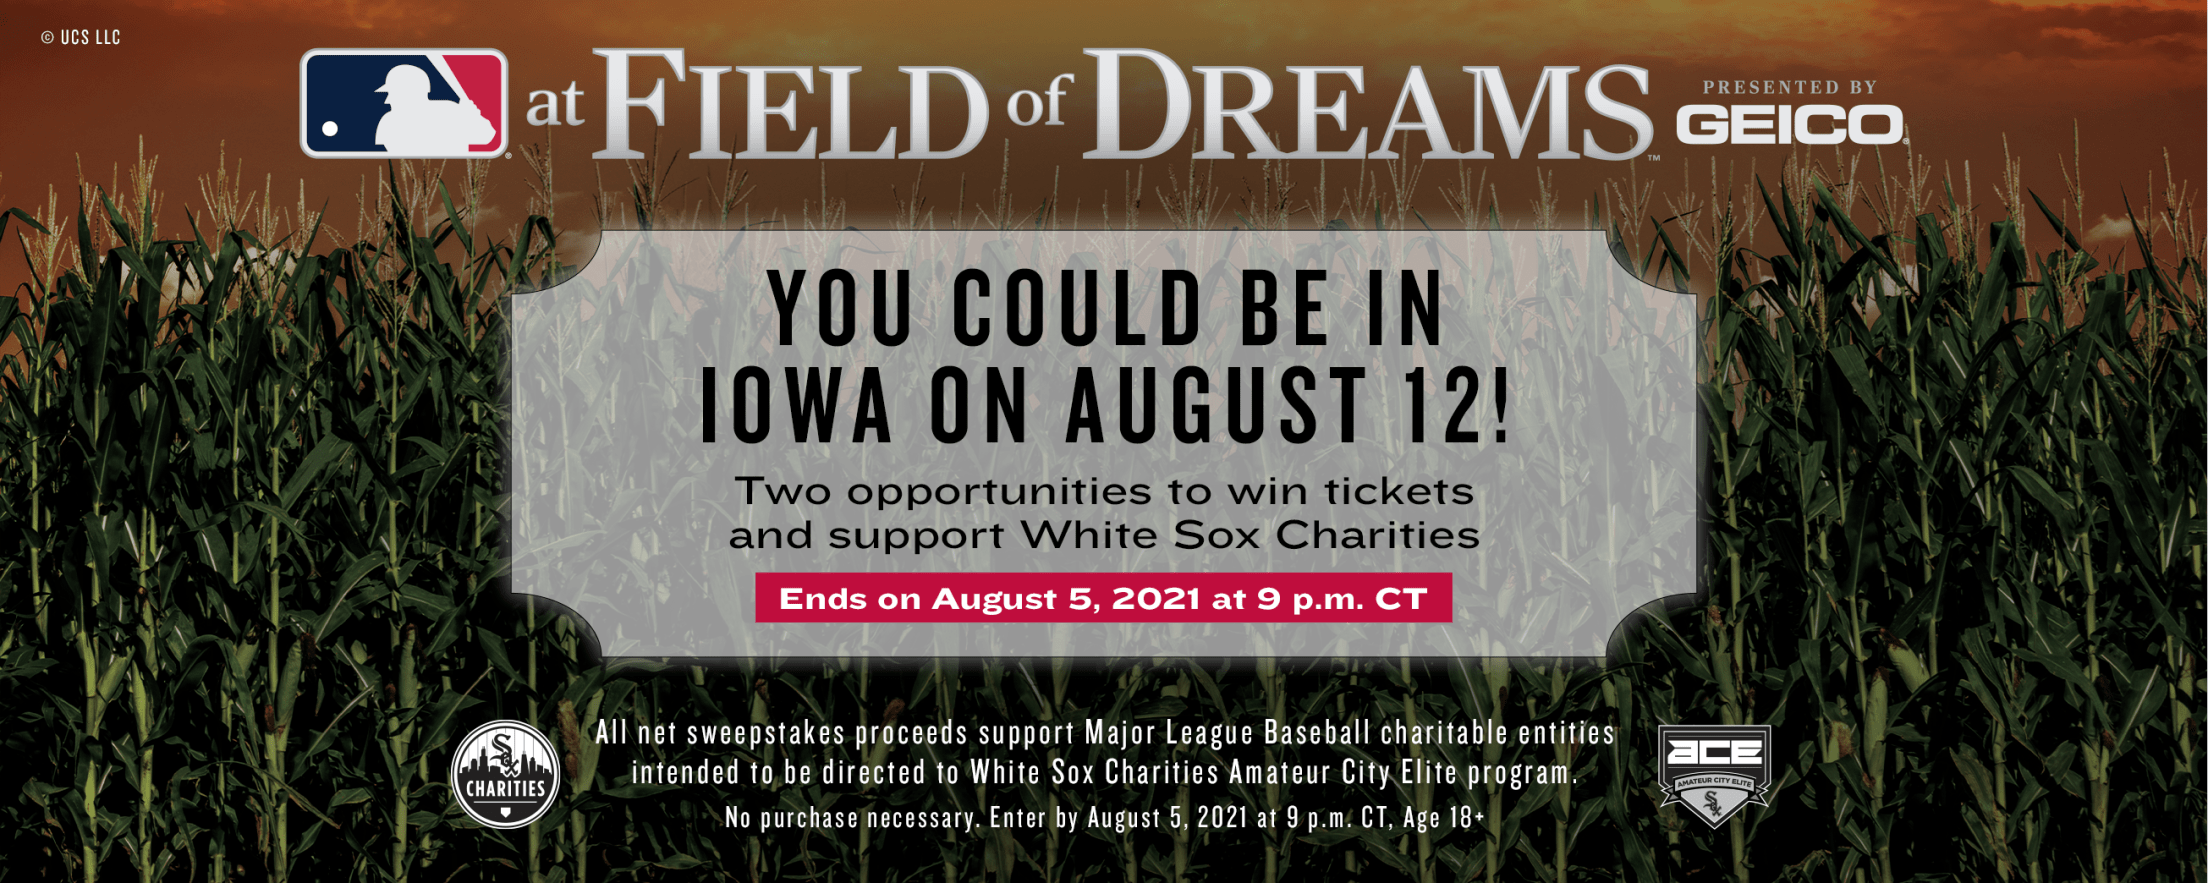 Chicago White Sox ACE team at Field of Dreams